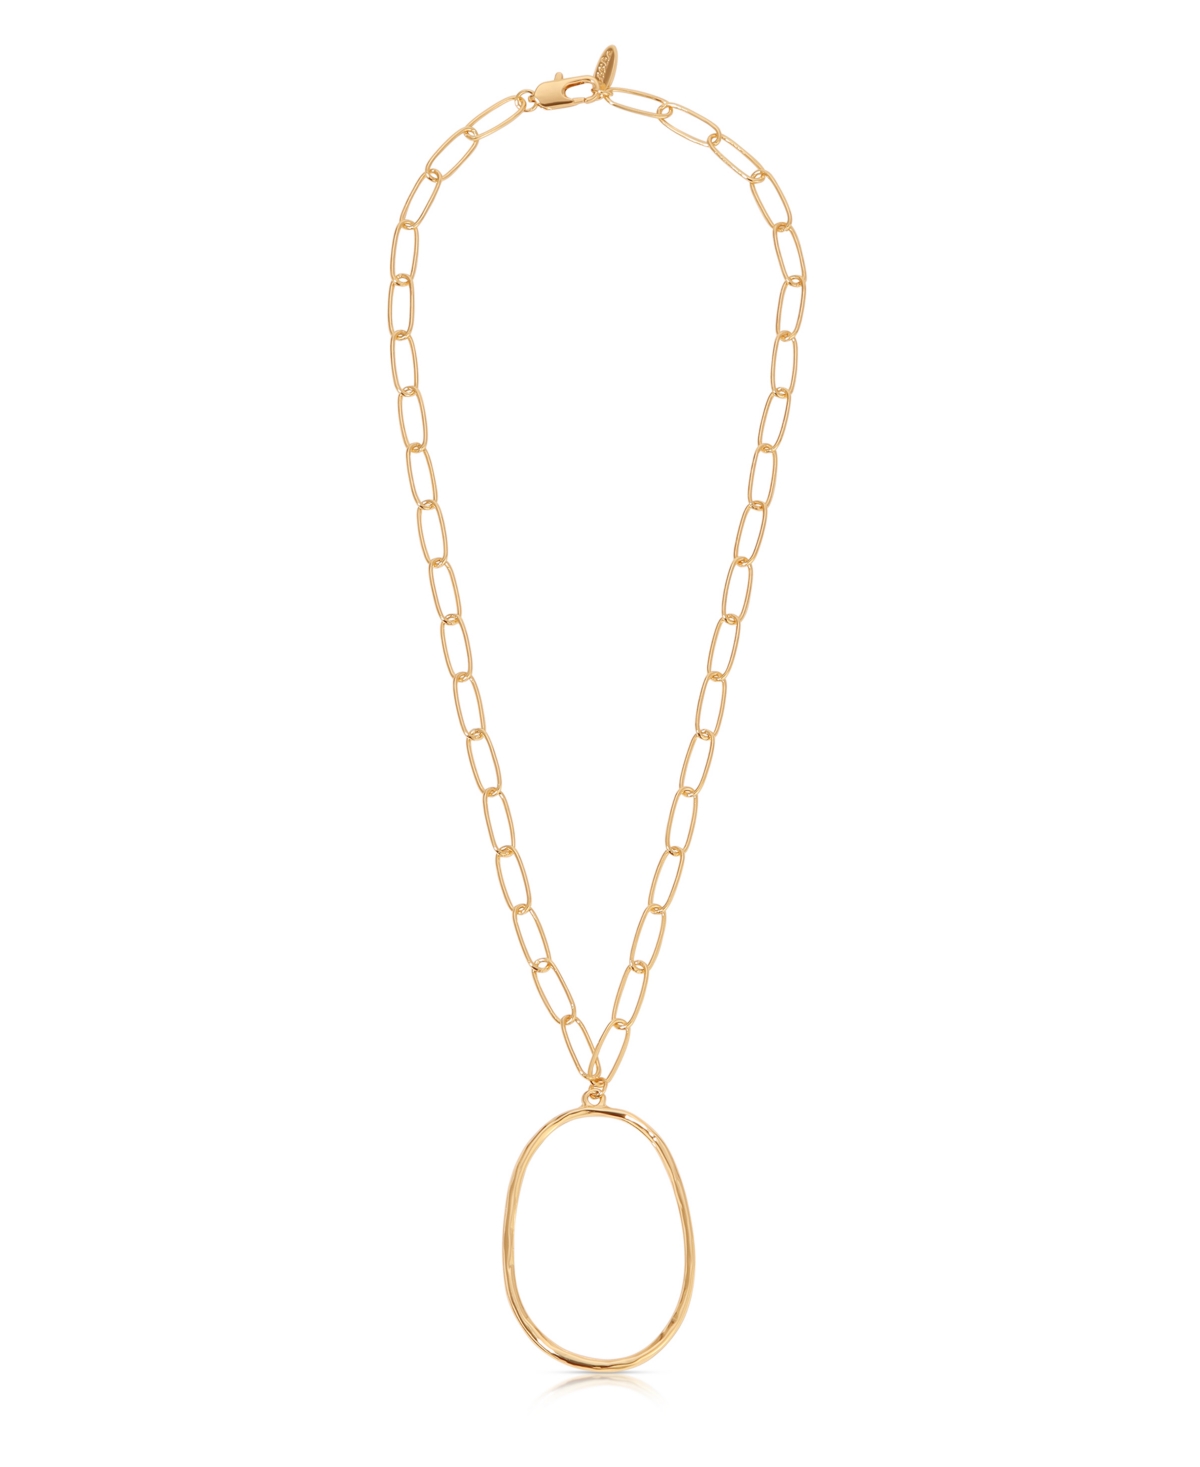 ETTIKA LARGE 18K GOLD-PLATED OVAL PENDANT CHAIN LINK NECKLACE